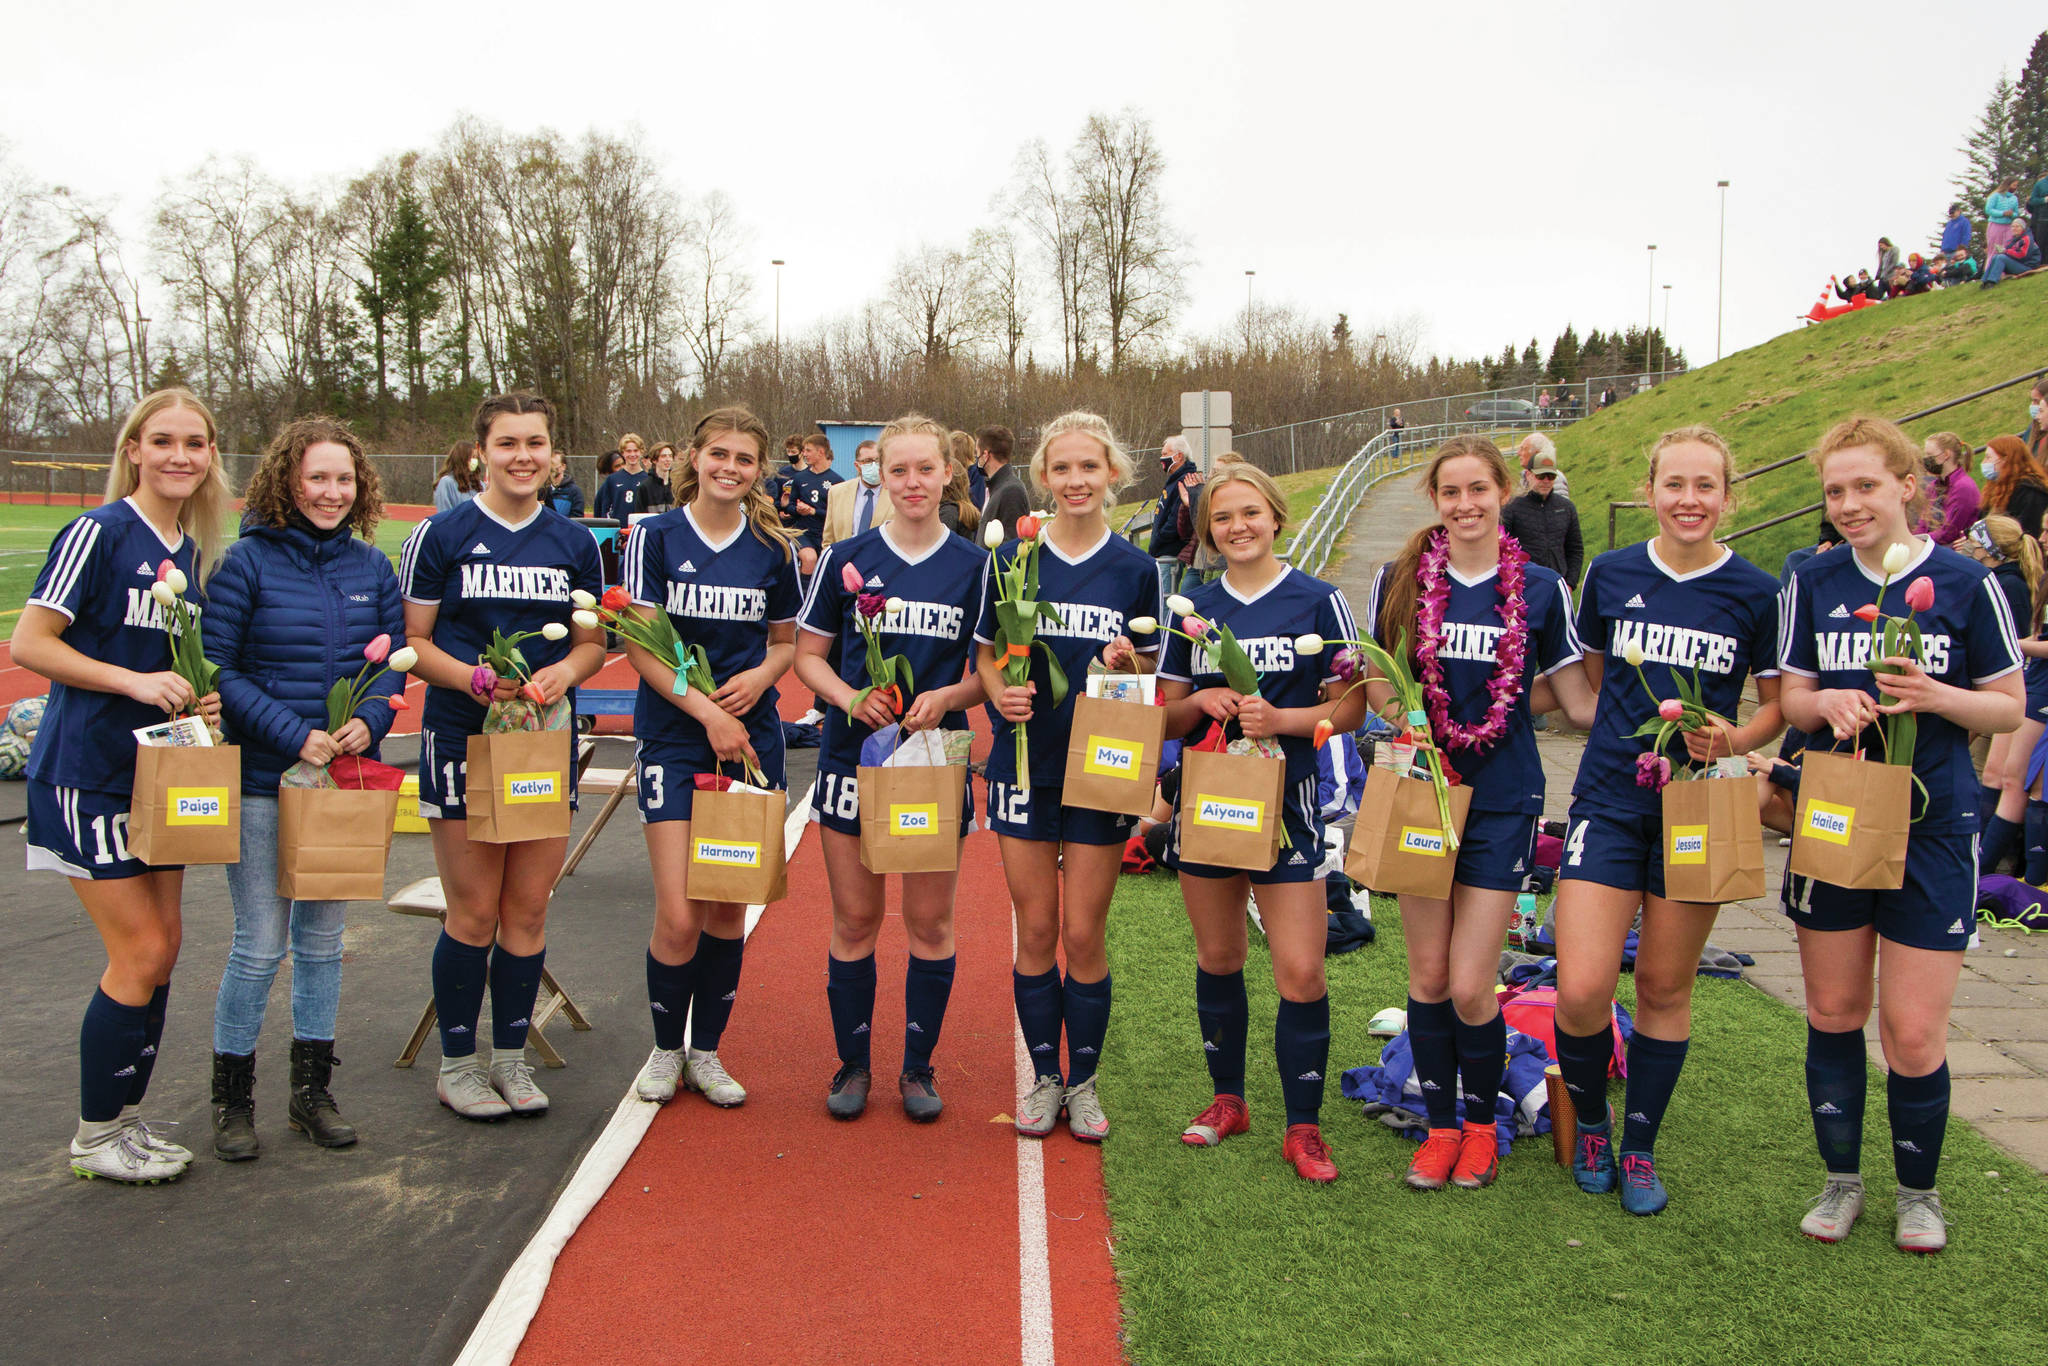 Photo by Sarah Knapp / Homer News
The seniors on the Homer High School girls soccer team were recognized in a ceremony May 14. Pictured left to right are Paige Jones, Katelyn Engebretsen, Katlyn Vogl, Harmony Davidson, Zoe Stonorov, Mya Houglum, Aiyana Cline, Laura Inama, Jessica Sonnen and Hailee Alexander.